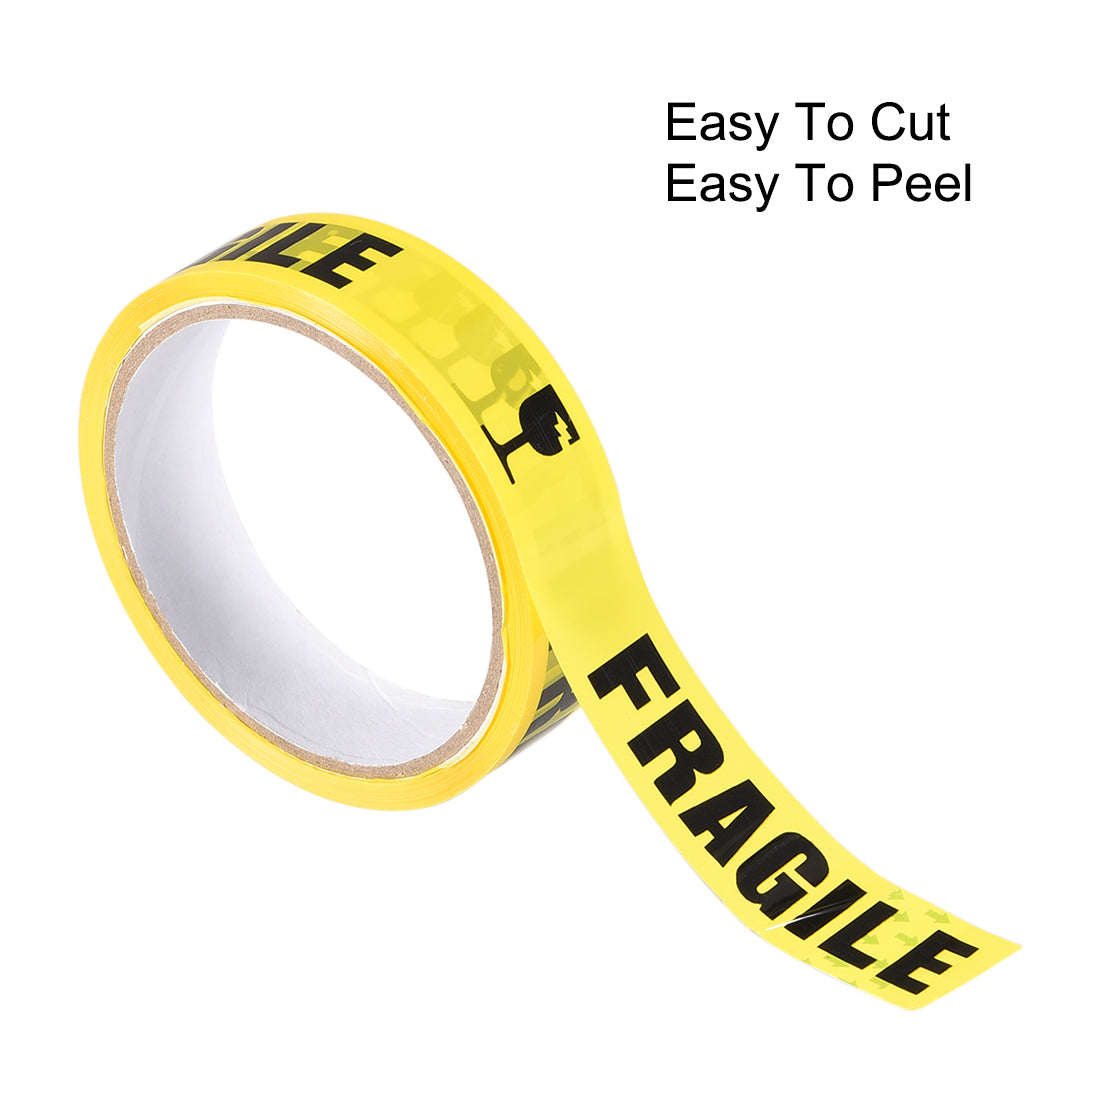 uxcell Uxcell Caution Warning Stripe Sticker Adhesive Tape FRAGILE Marking, 82 Ft x 1 Inch(LxW), Yellow Black for Workplace Wet Floor Caution 2pcs